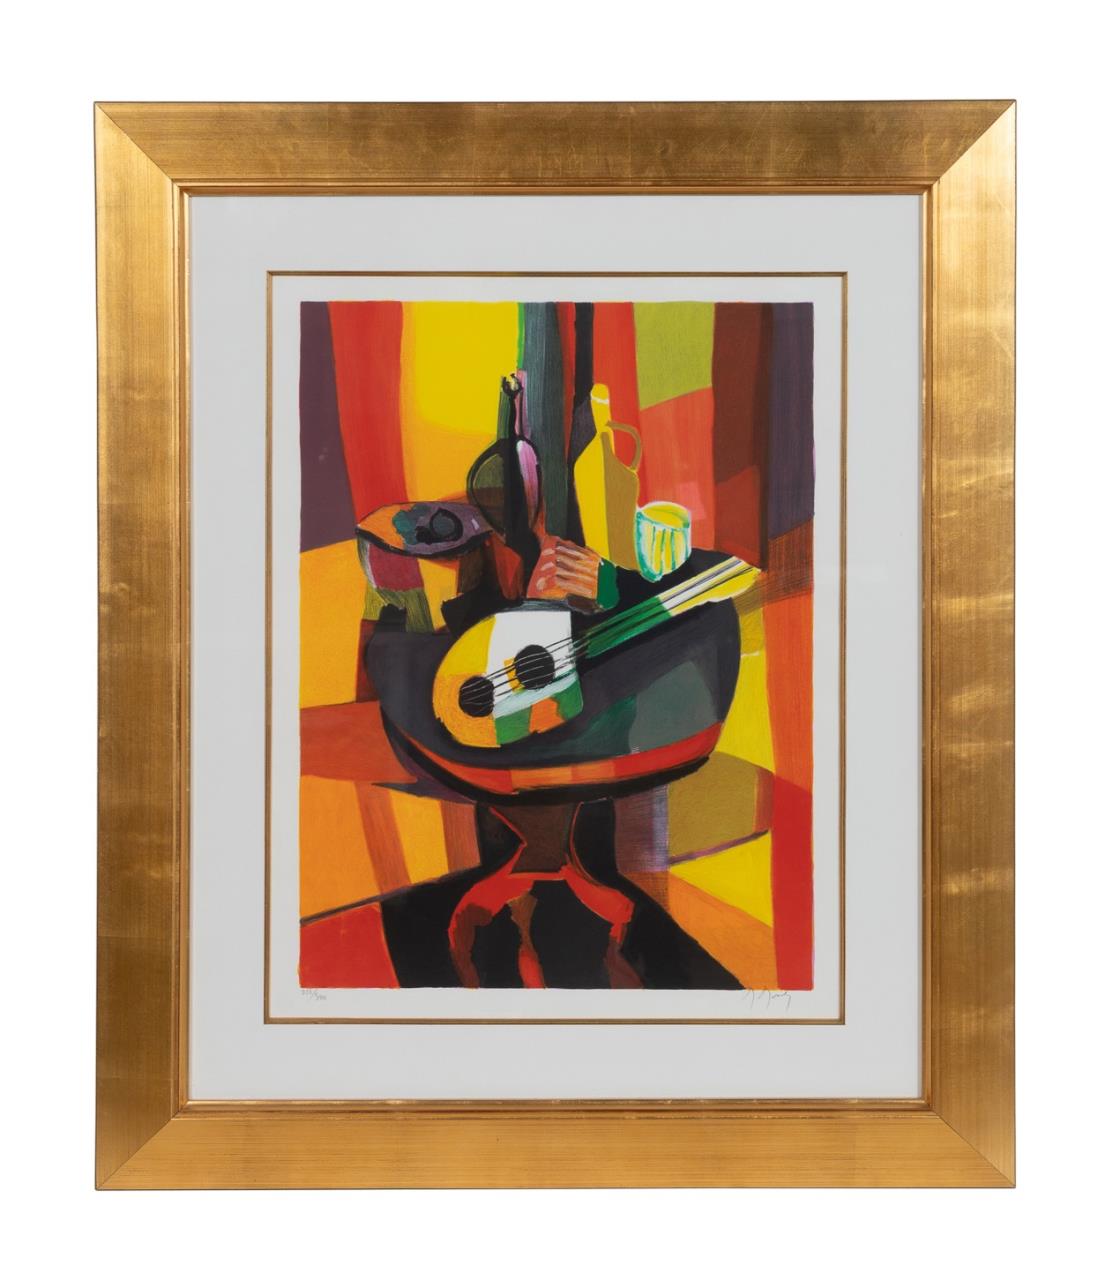 M. MOULY GUITAR STILL LIFE LITHOGRAPH